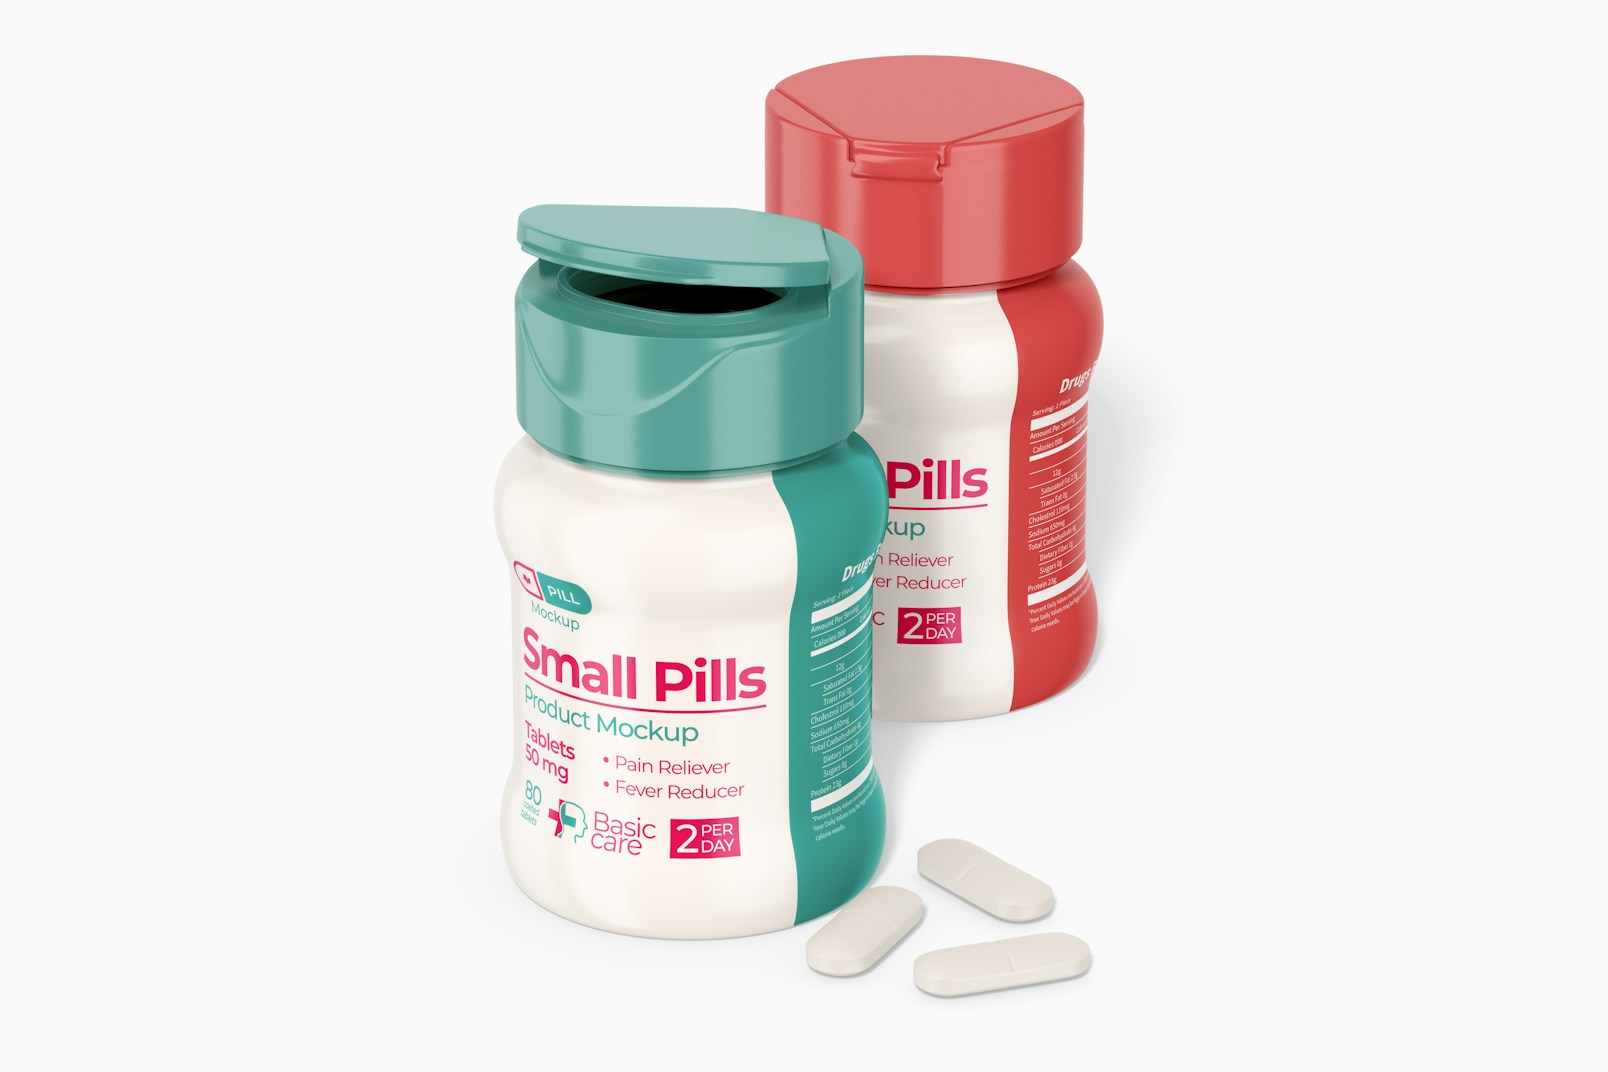 Small Pills Bottle Mockup, Front and Back View